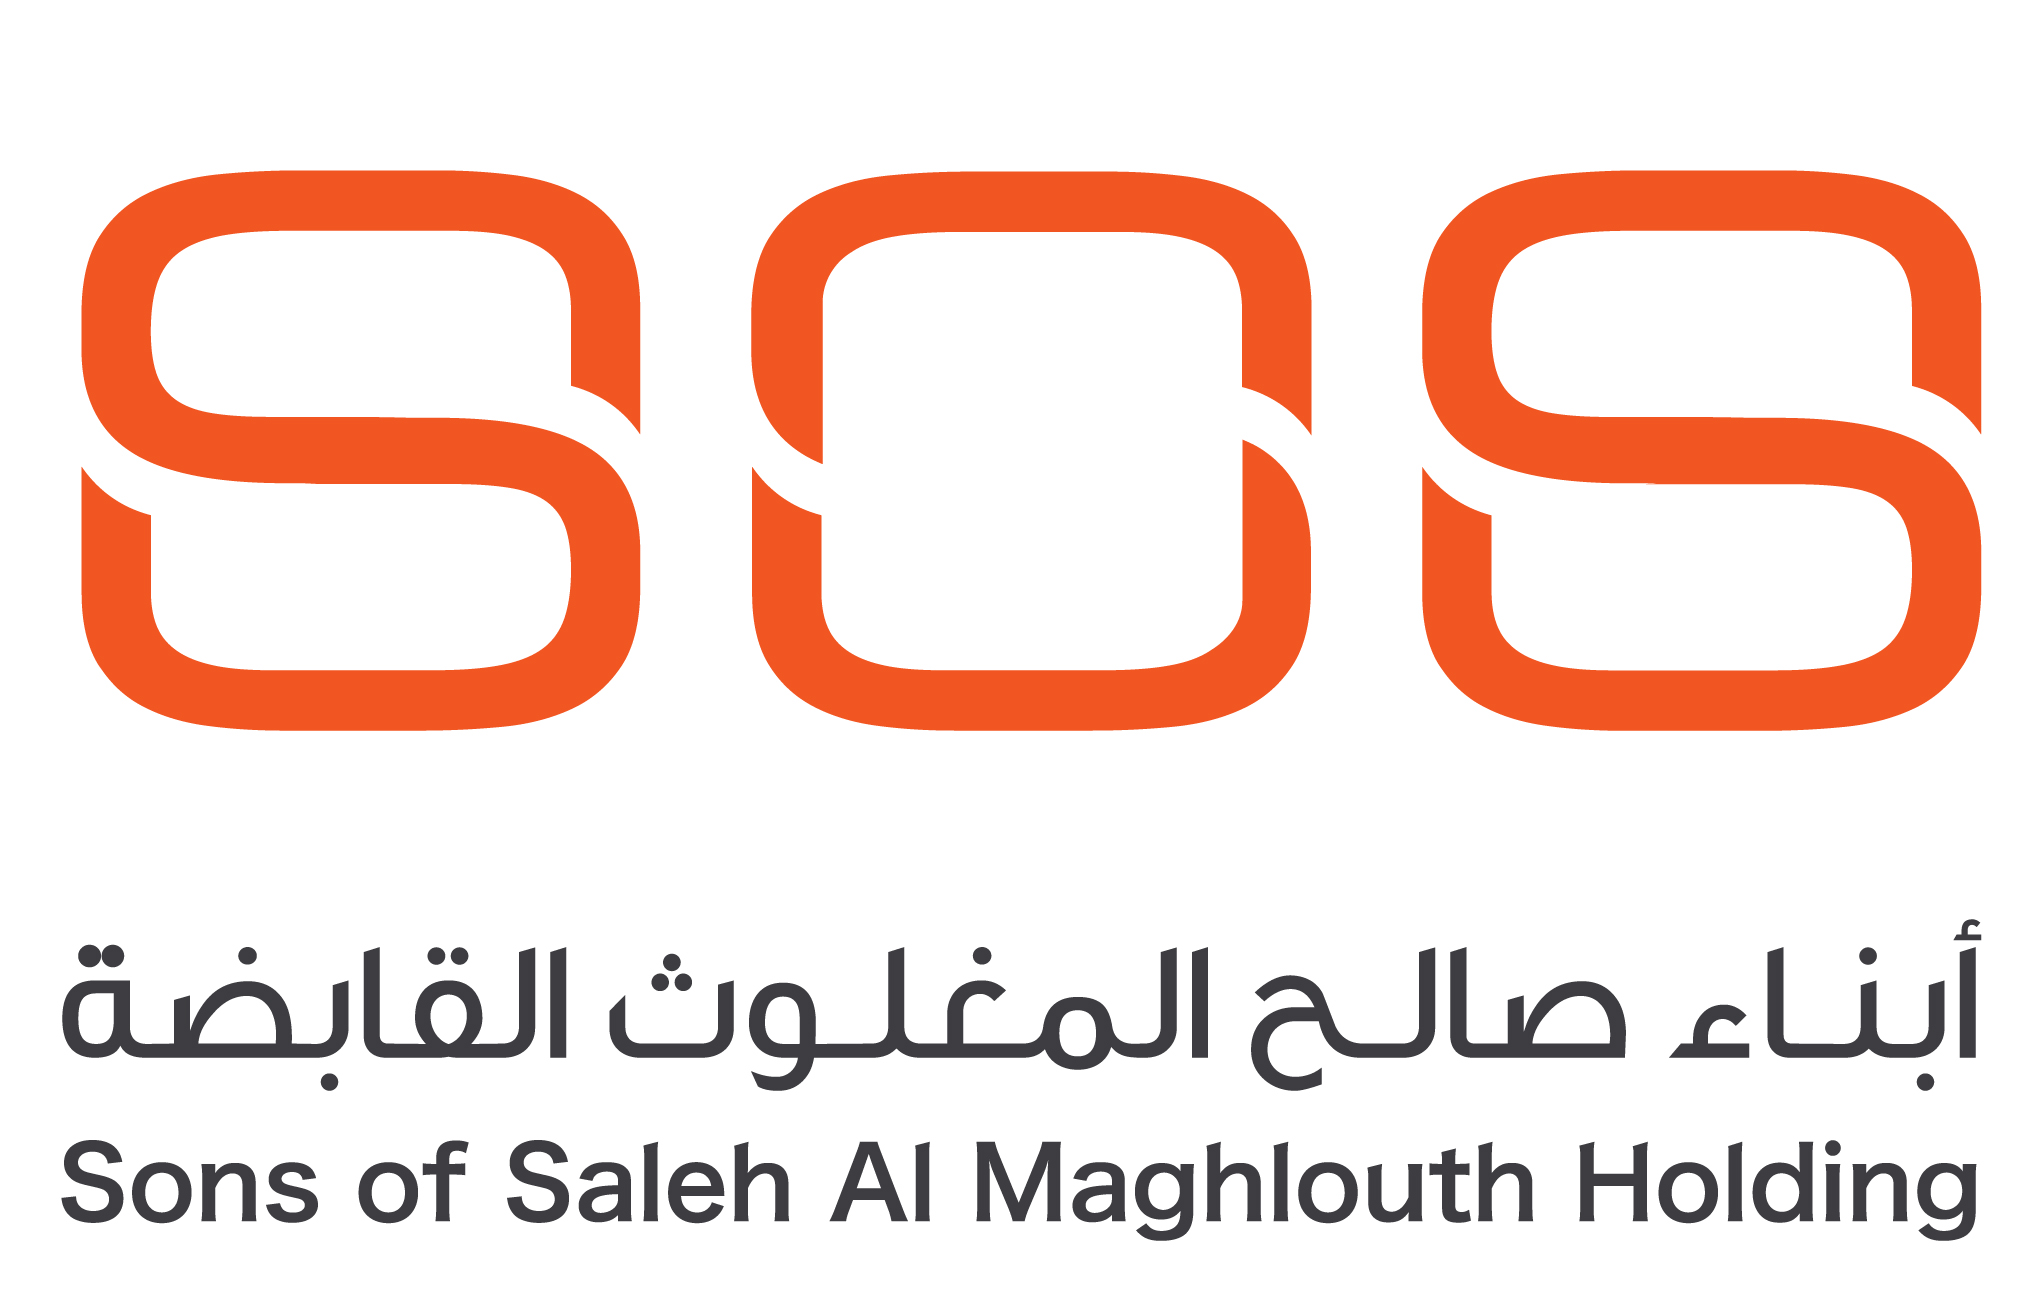 sons of saleh al-maghlouth co. ltd.